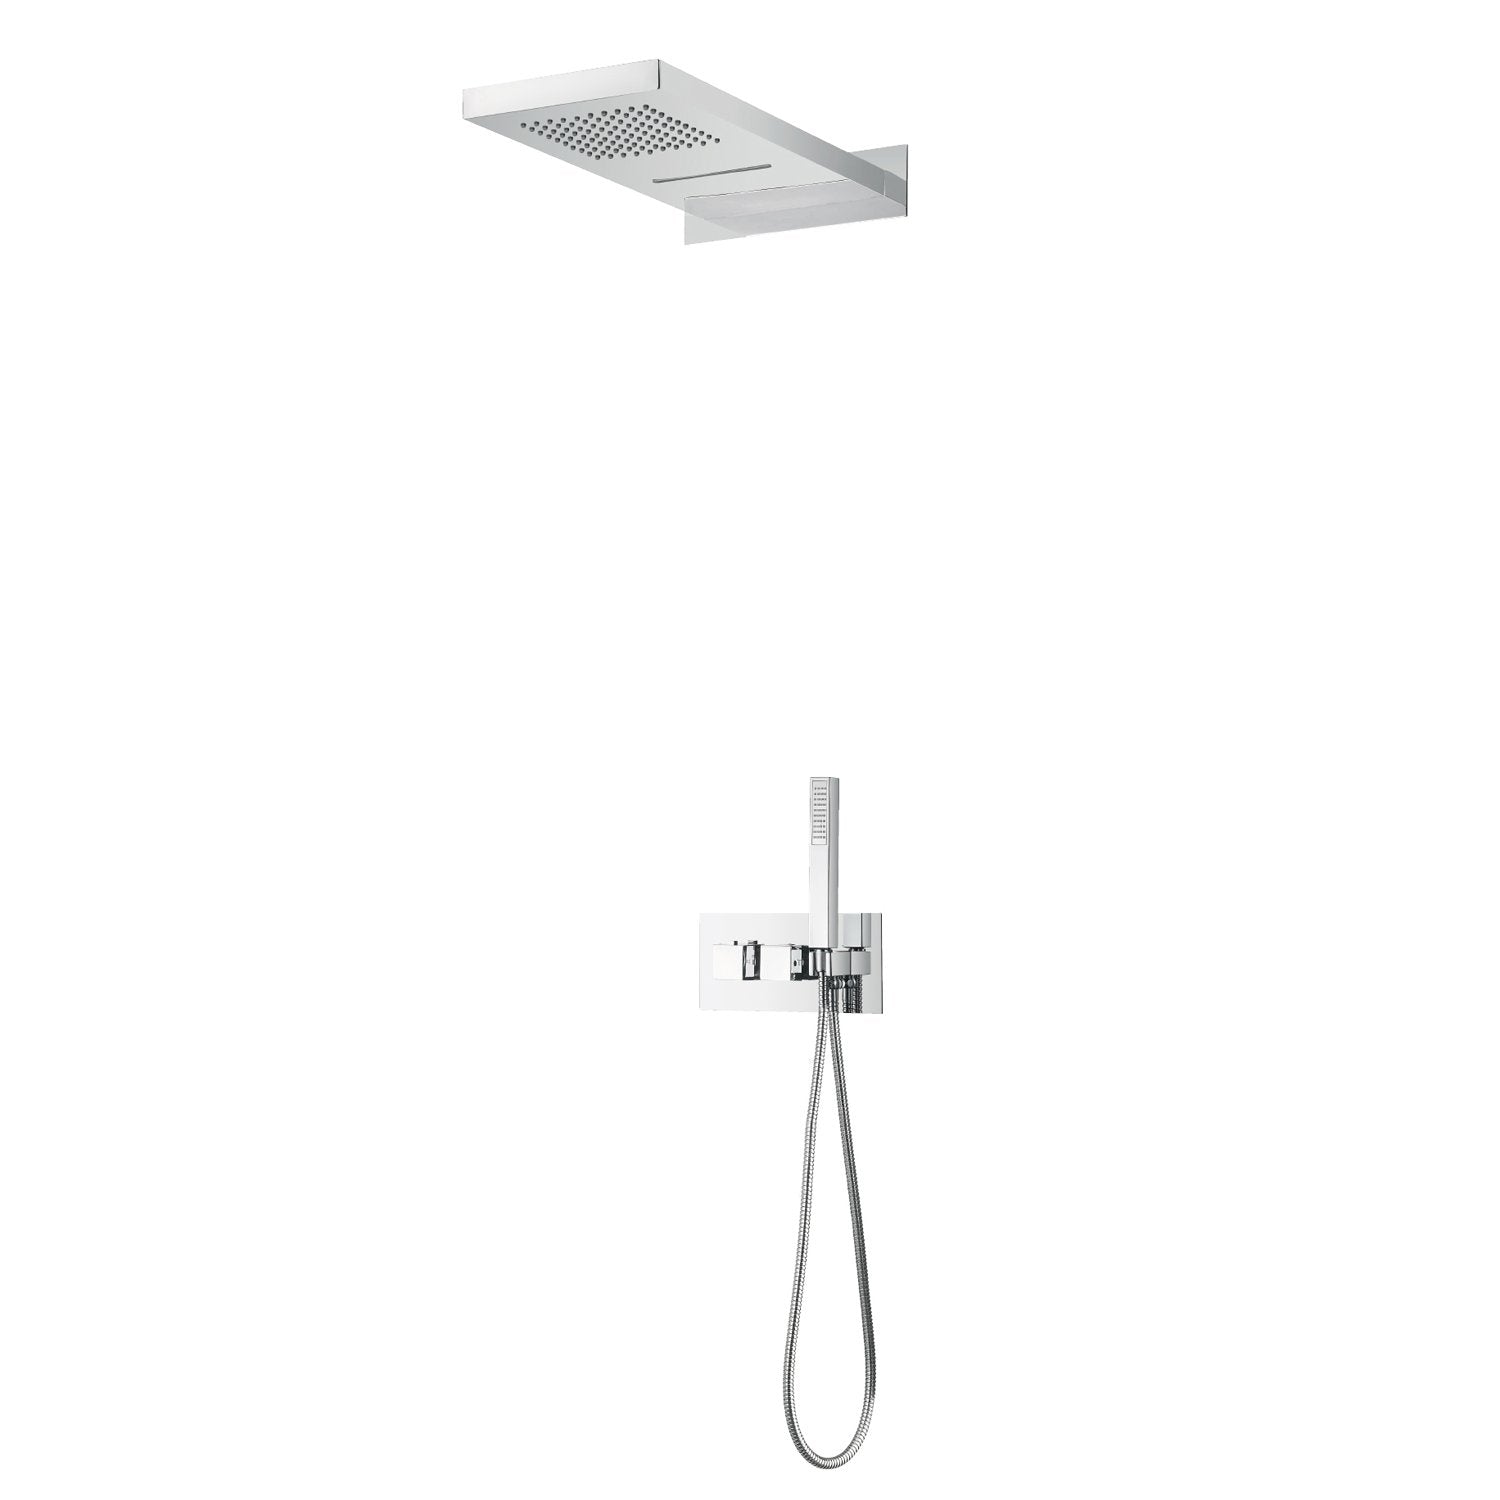 DAX Stainless Steel Shower System Thermostatic Mixer 3 Funtions Chrome Finish (DAX-9003-CR)